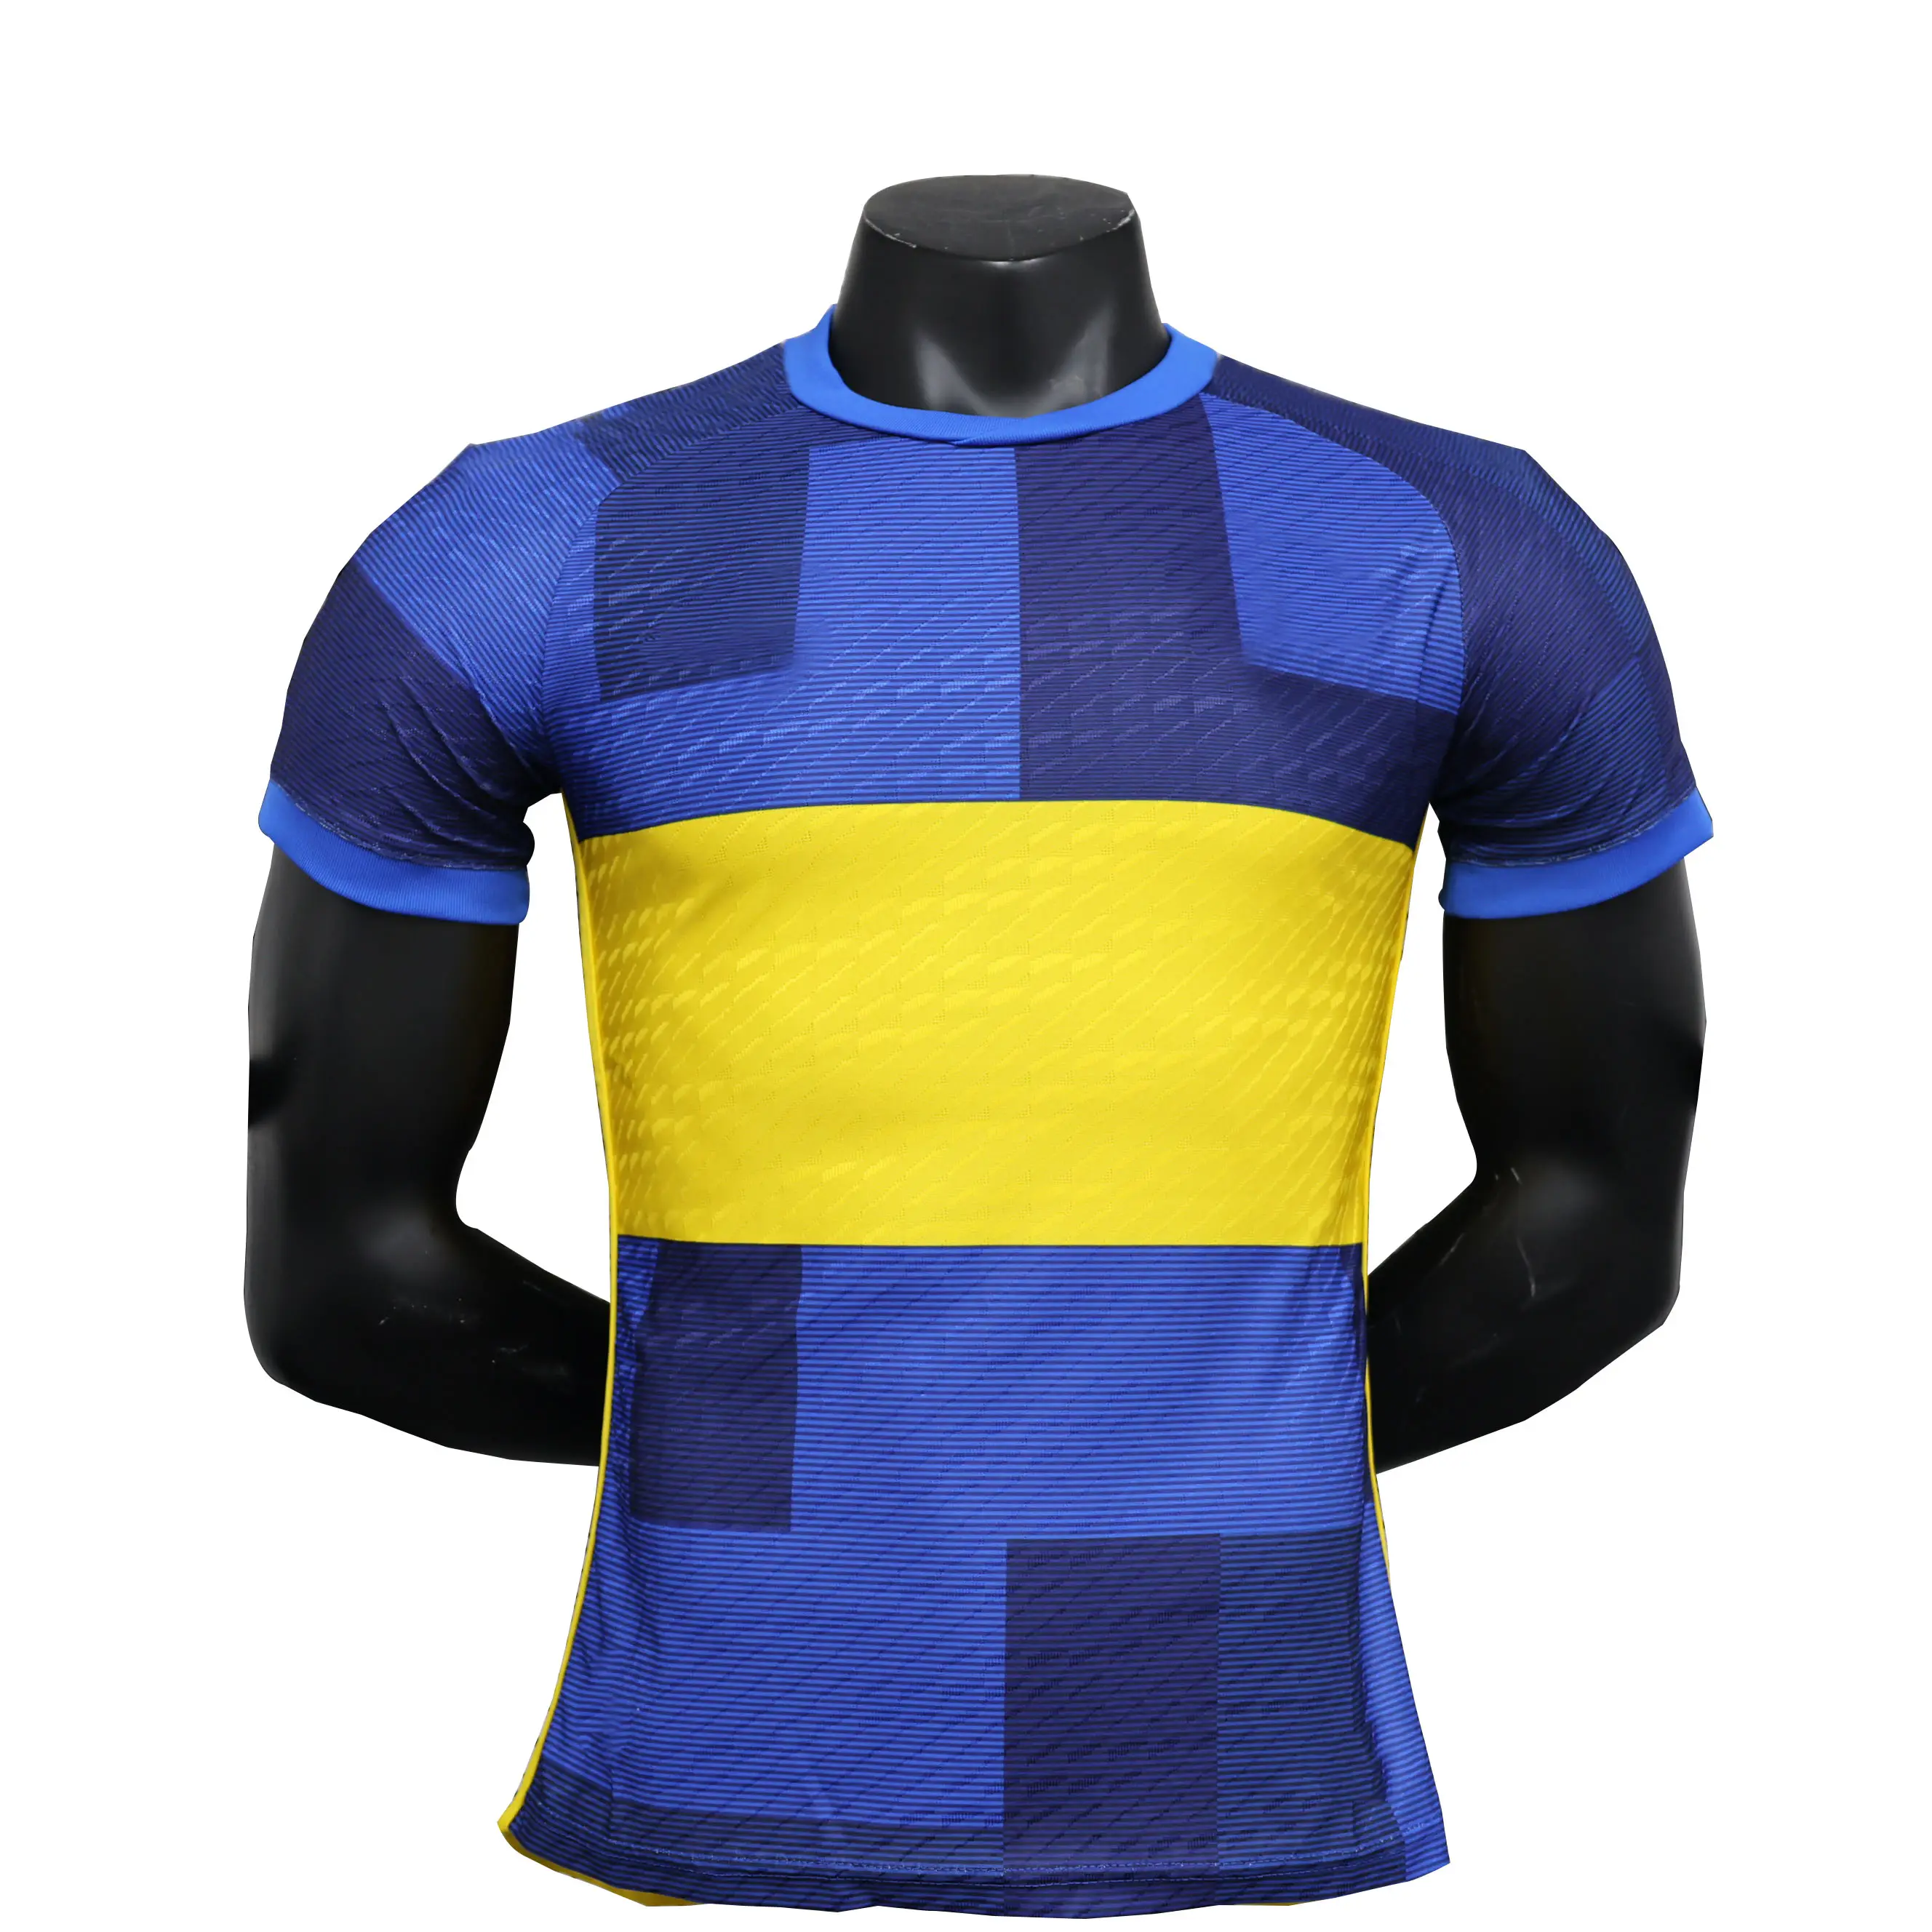 Full Sublimation Printed Soccer Jersey Soccer Uniforms First Division Football Shirts